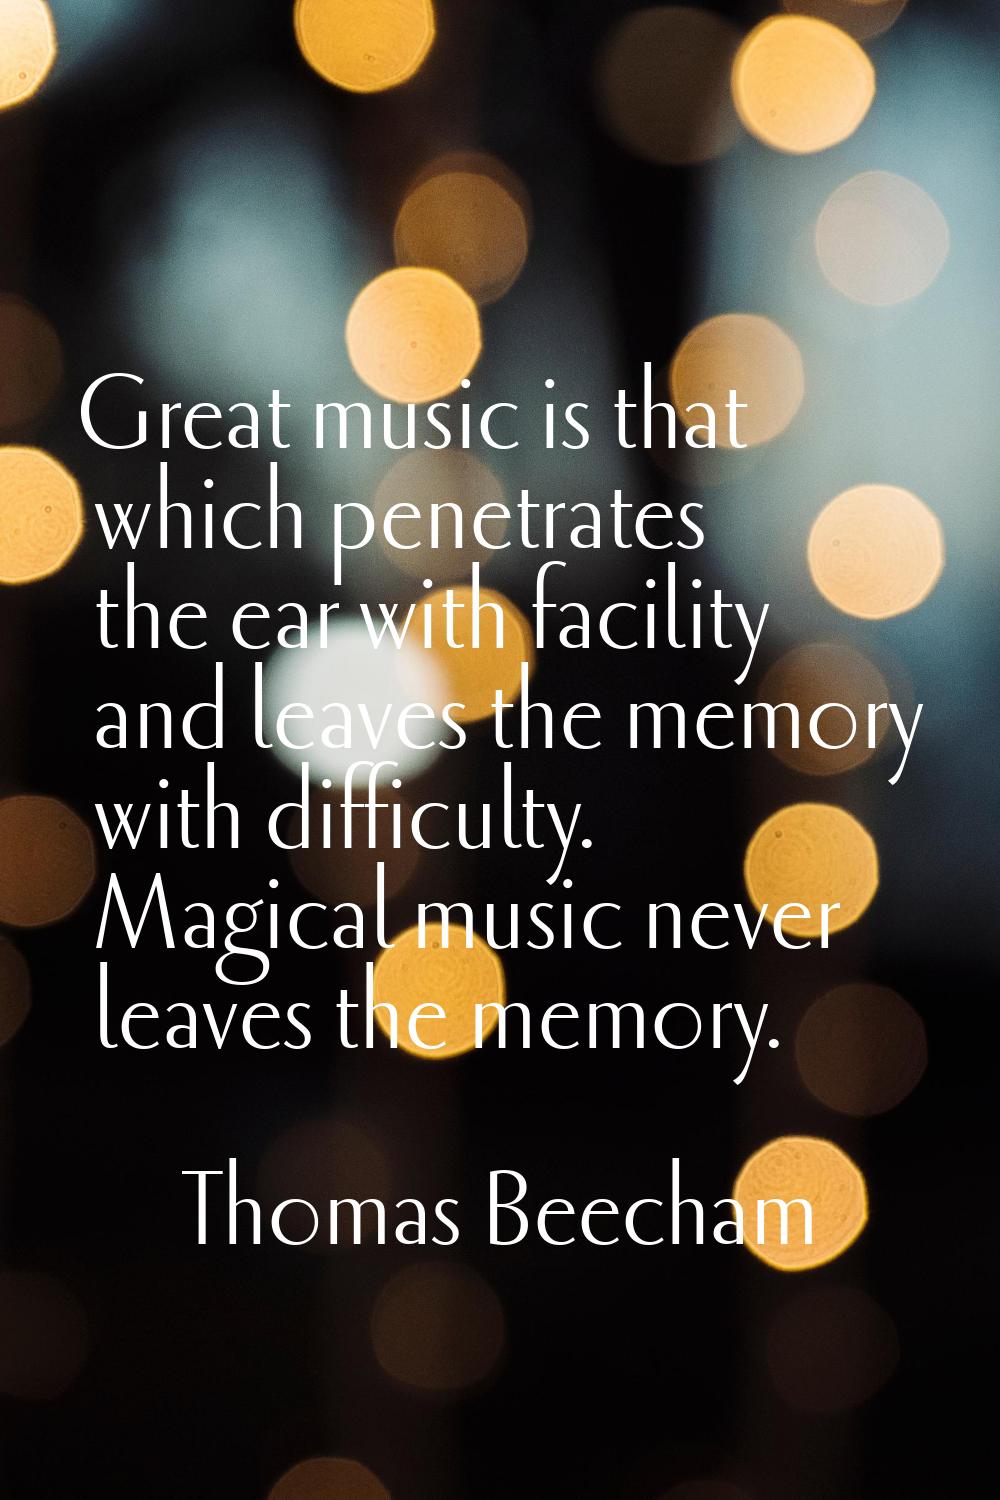 Great music is that which penetrates the ear with facility and leaves the memory with difficulty. M